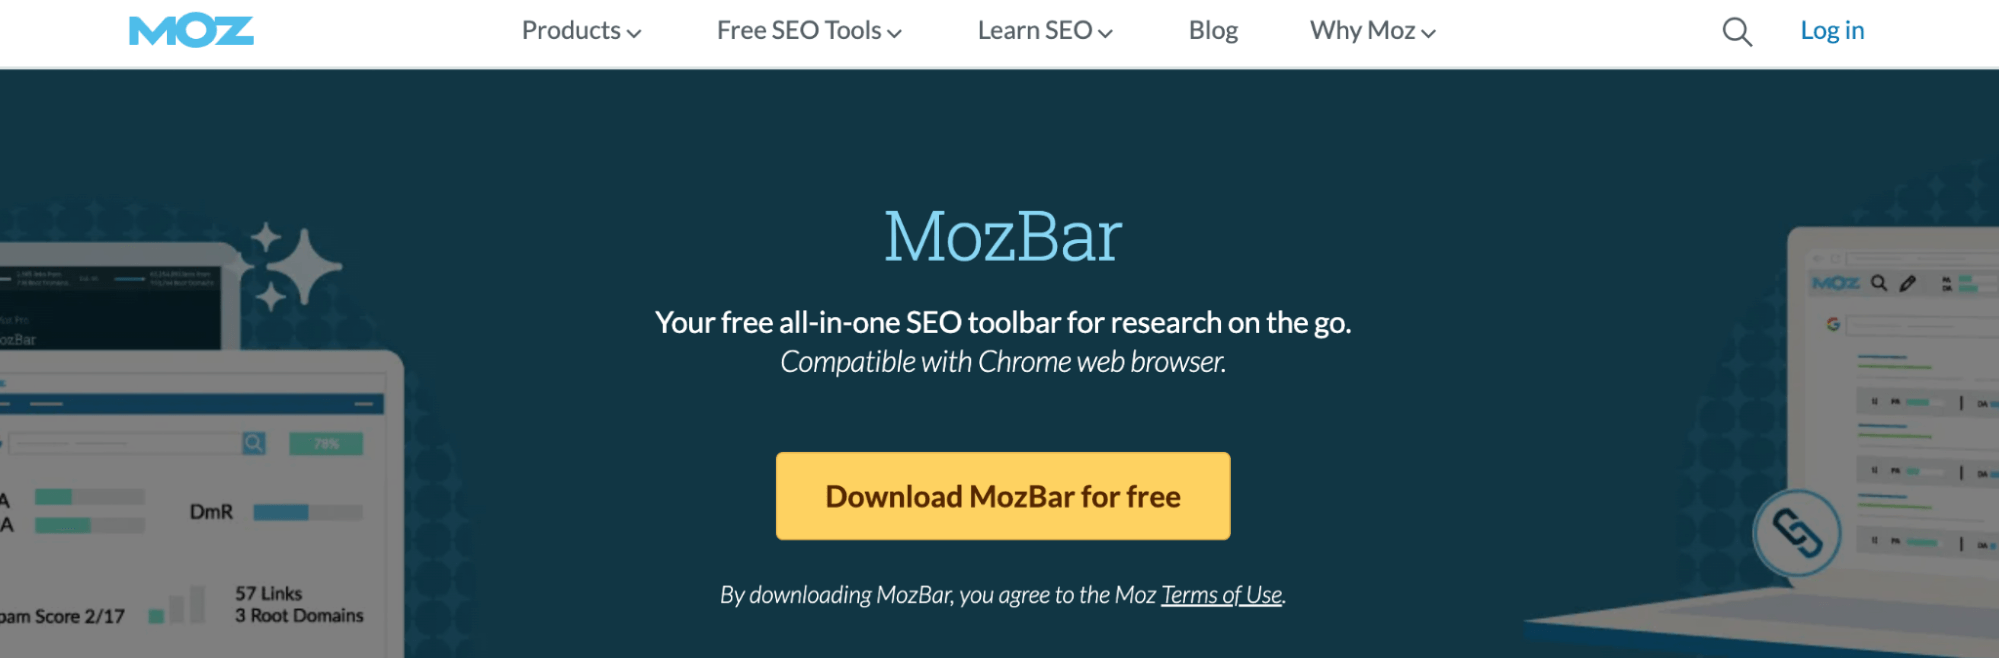 The homepage of MozBar’s SEO toolbar with a navy header and yellow button